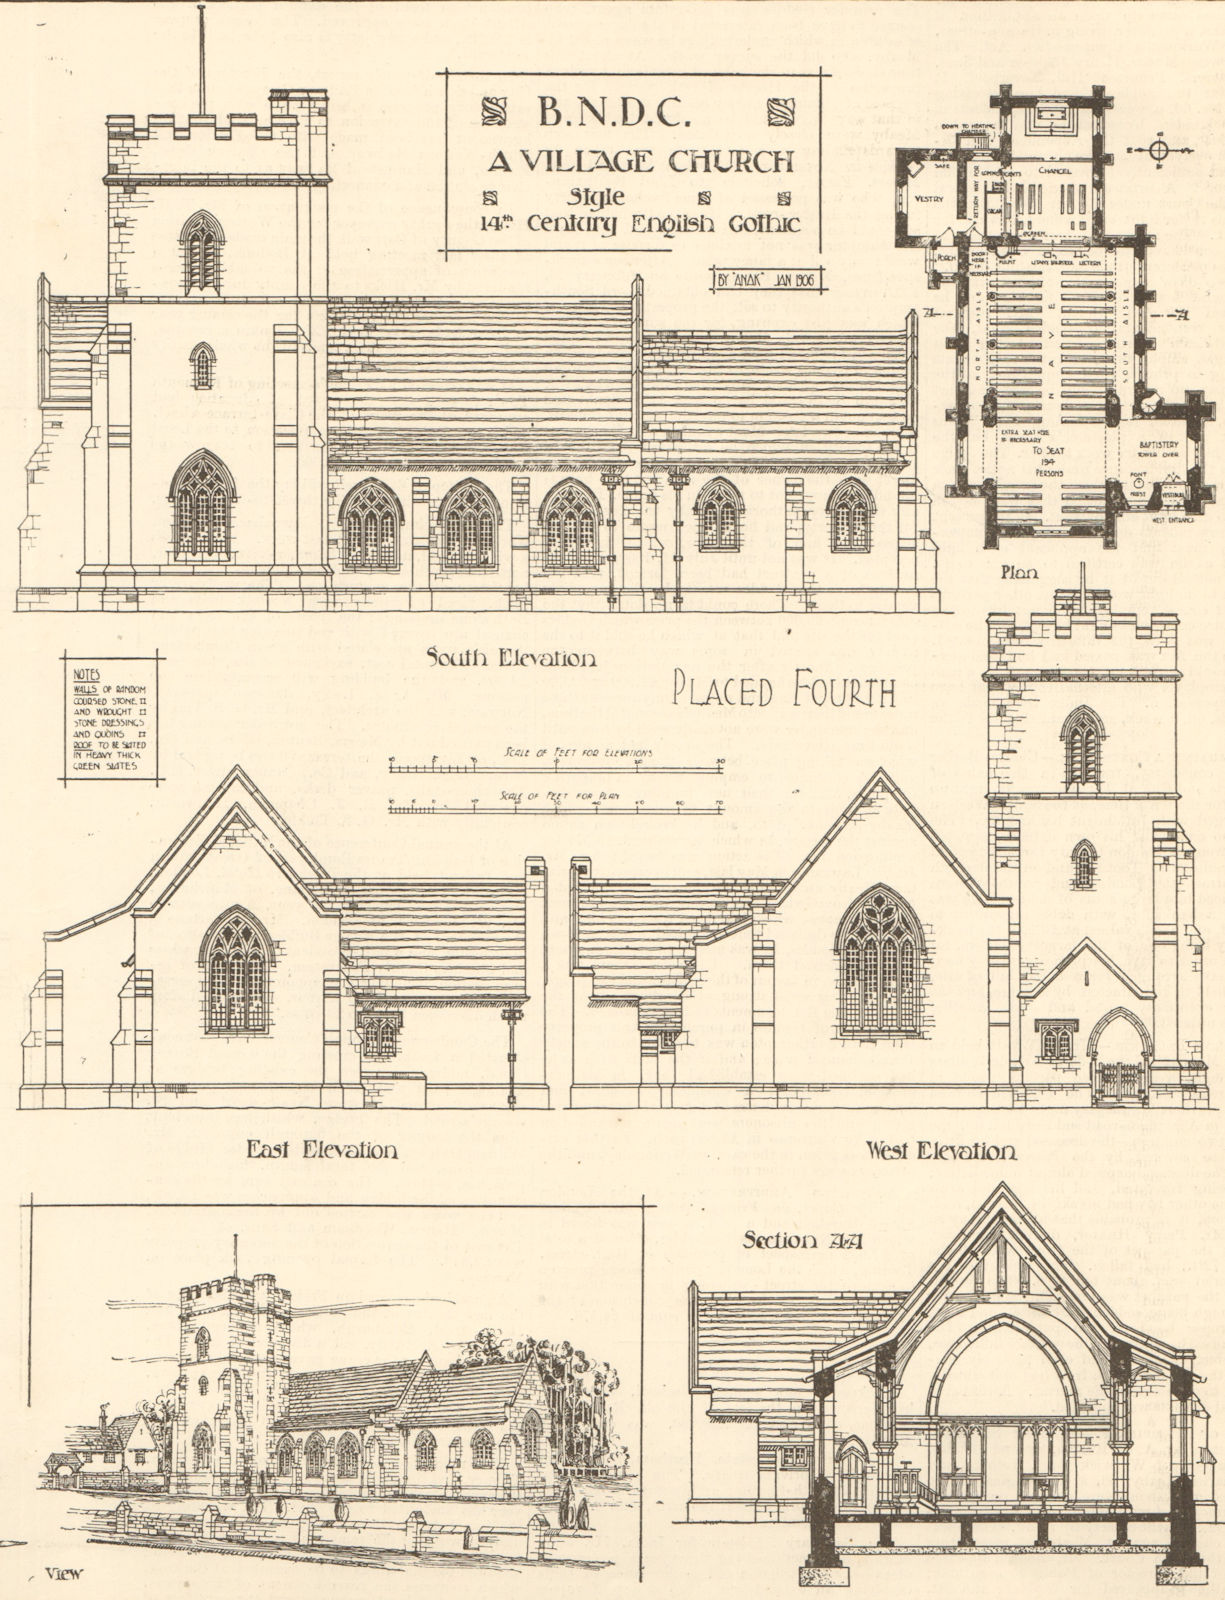 A village church style 14th century English Gothic. View, elevations, plan 1906